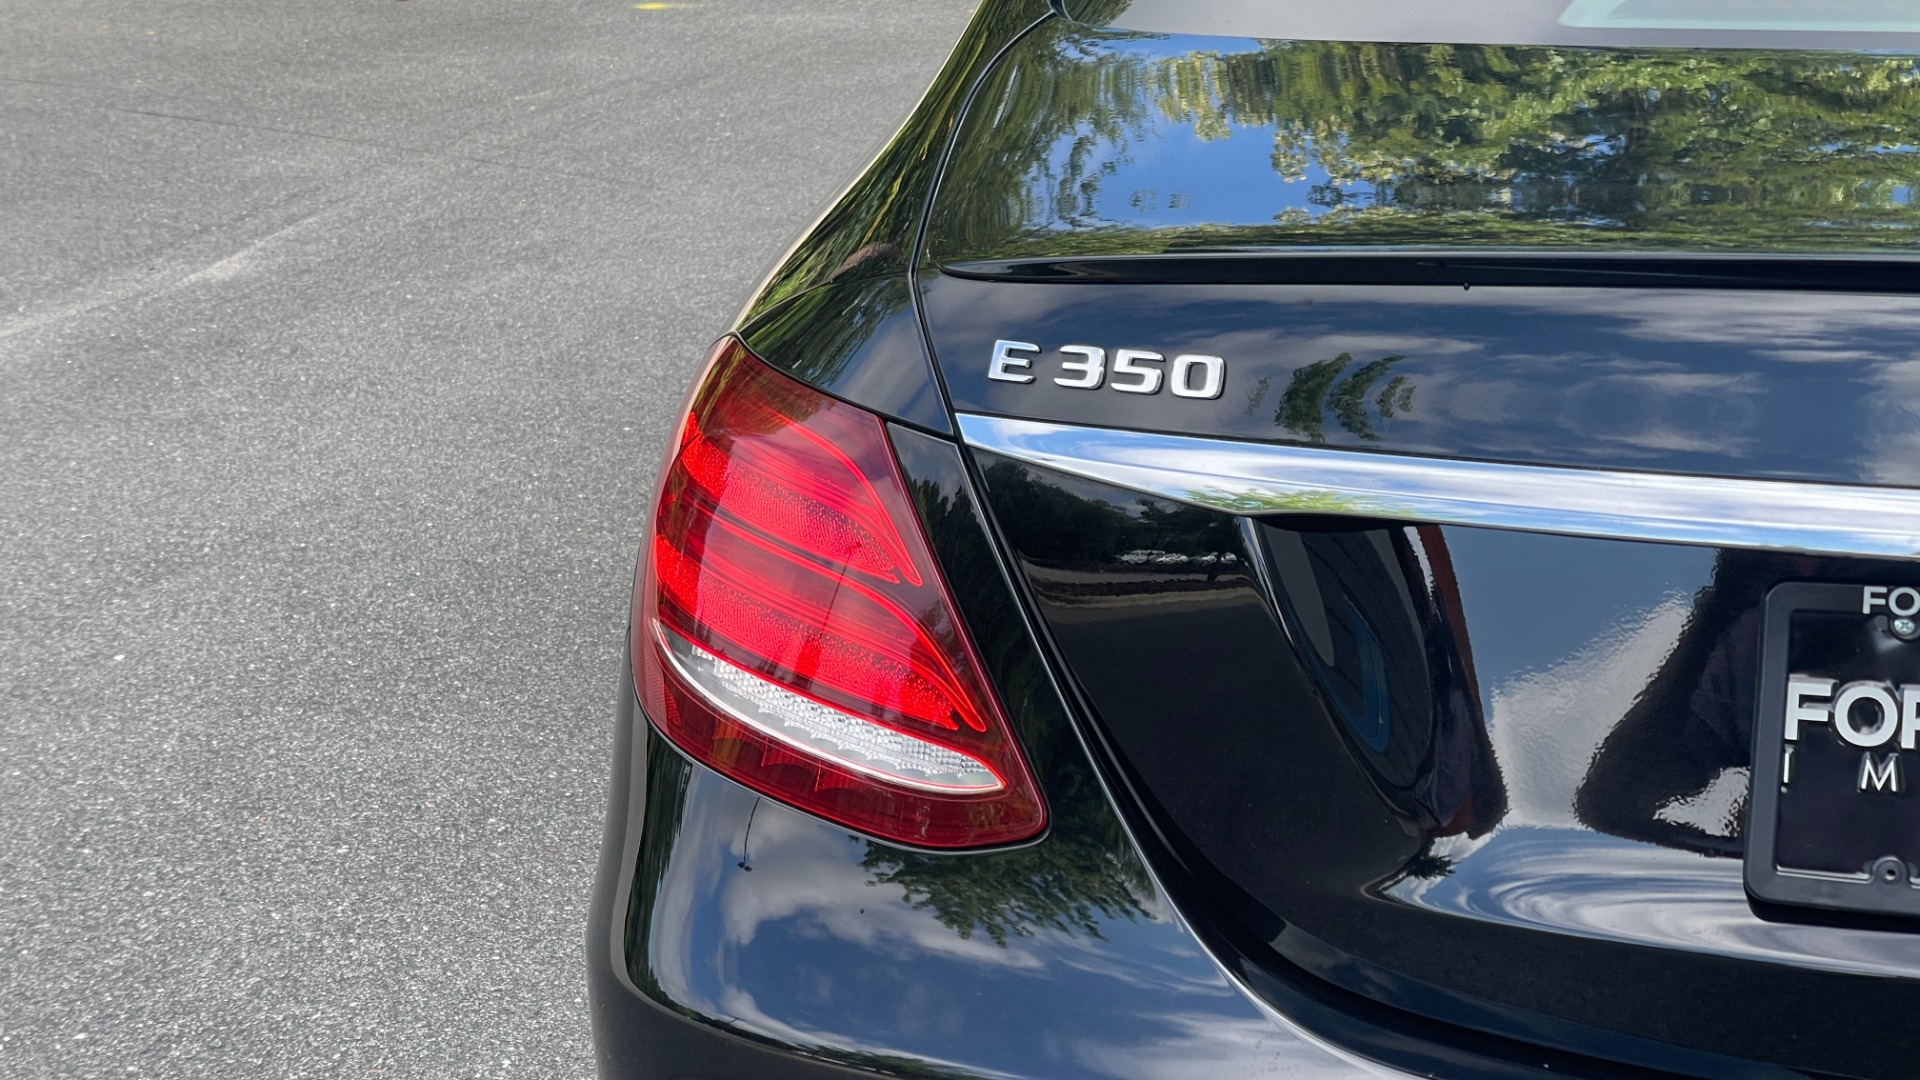 Used 2020 Mercedes-Benz E-Class E 350 / 4MATIC / AMG LINE / BURMESTER SOUND / PANORAMIC ROOF for sale $52,999 at Formula Imports in Charlotte NC 28227 20